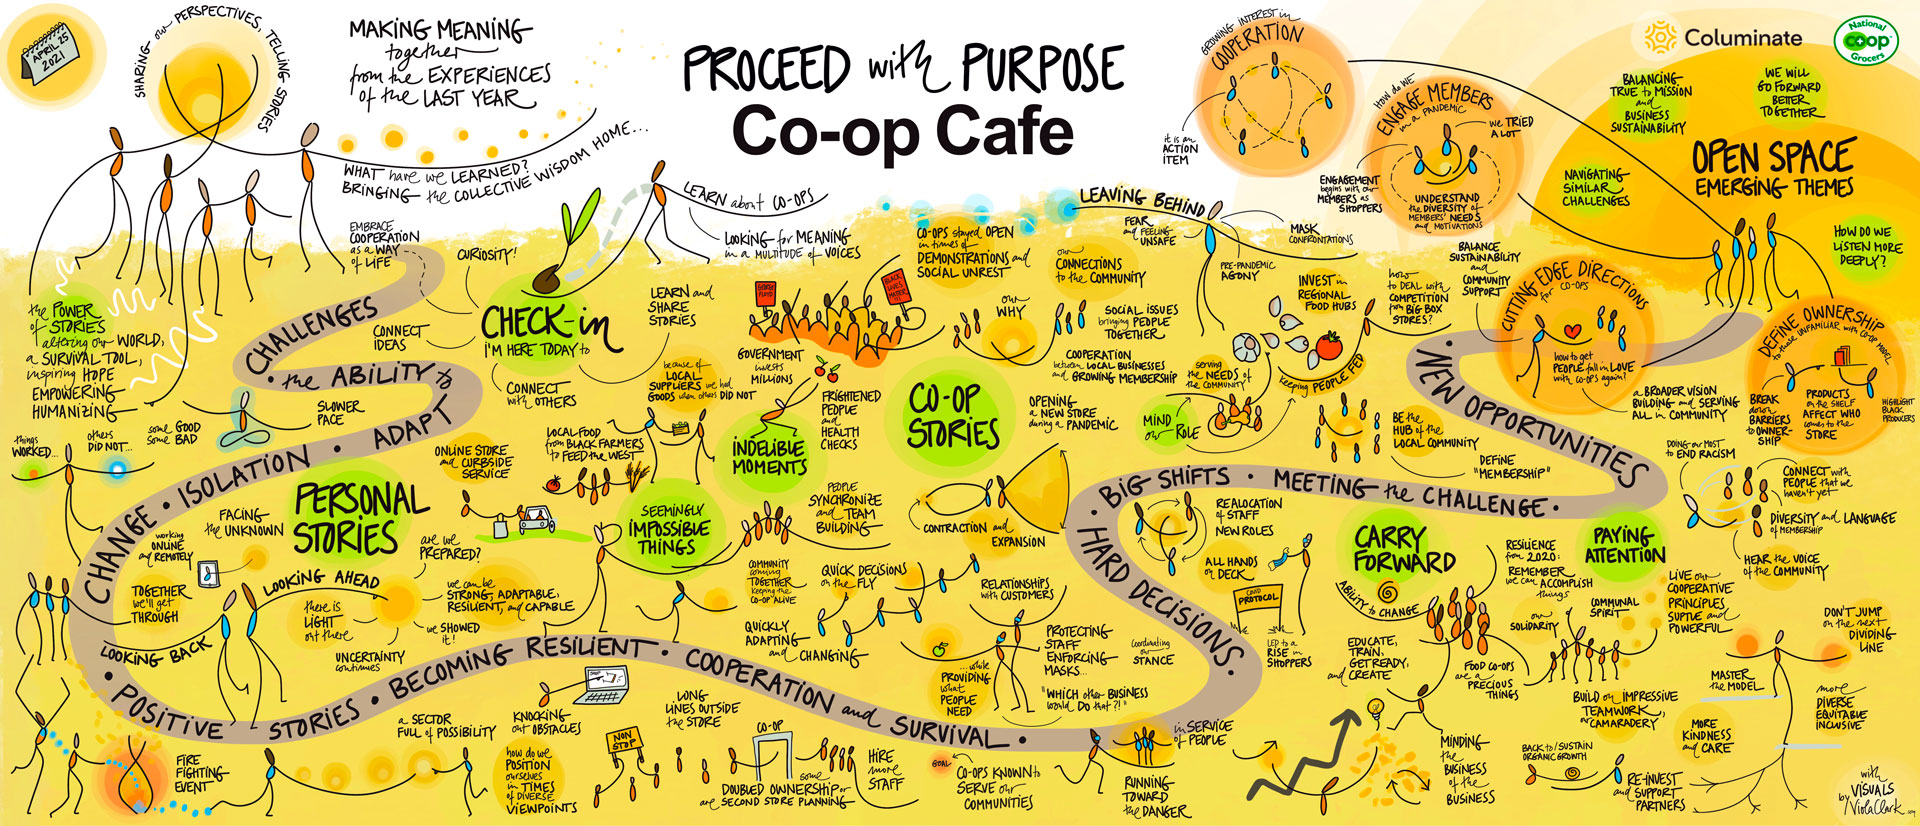 Cooperative Cafe - Proceed with Purpose